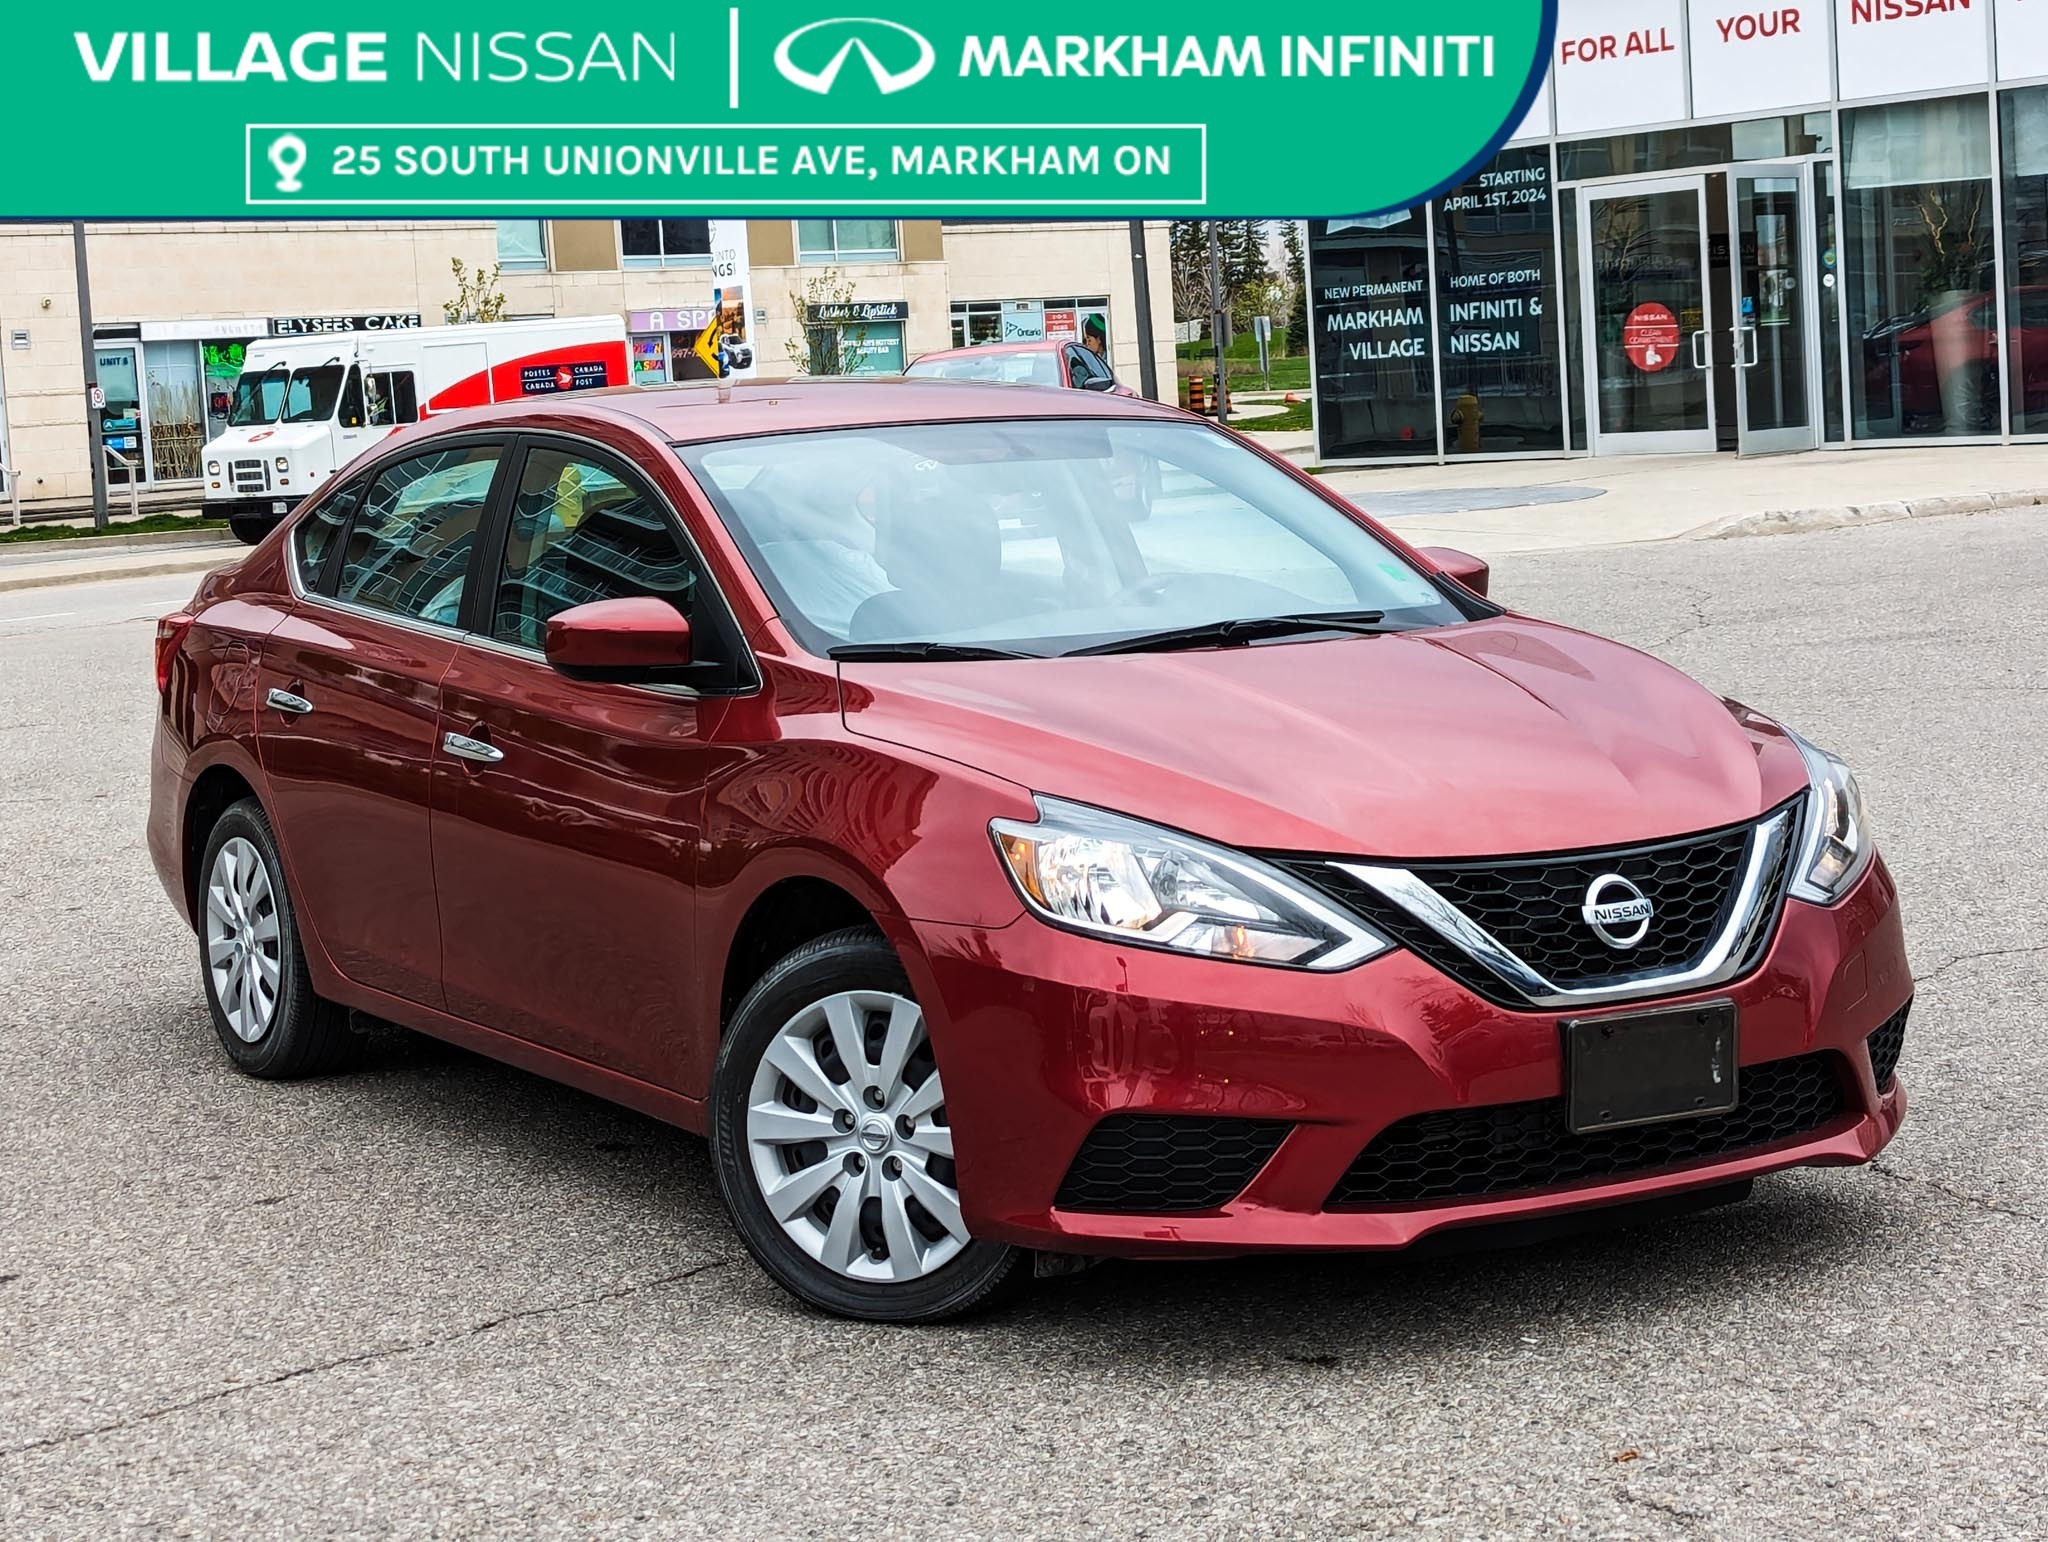 2017 Nissan Sentra LOCAL TRADE-IN | DEALERSHIP SERVICED | HEATED SEAT